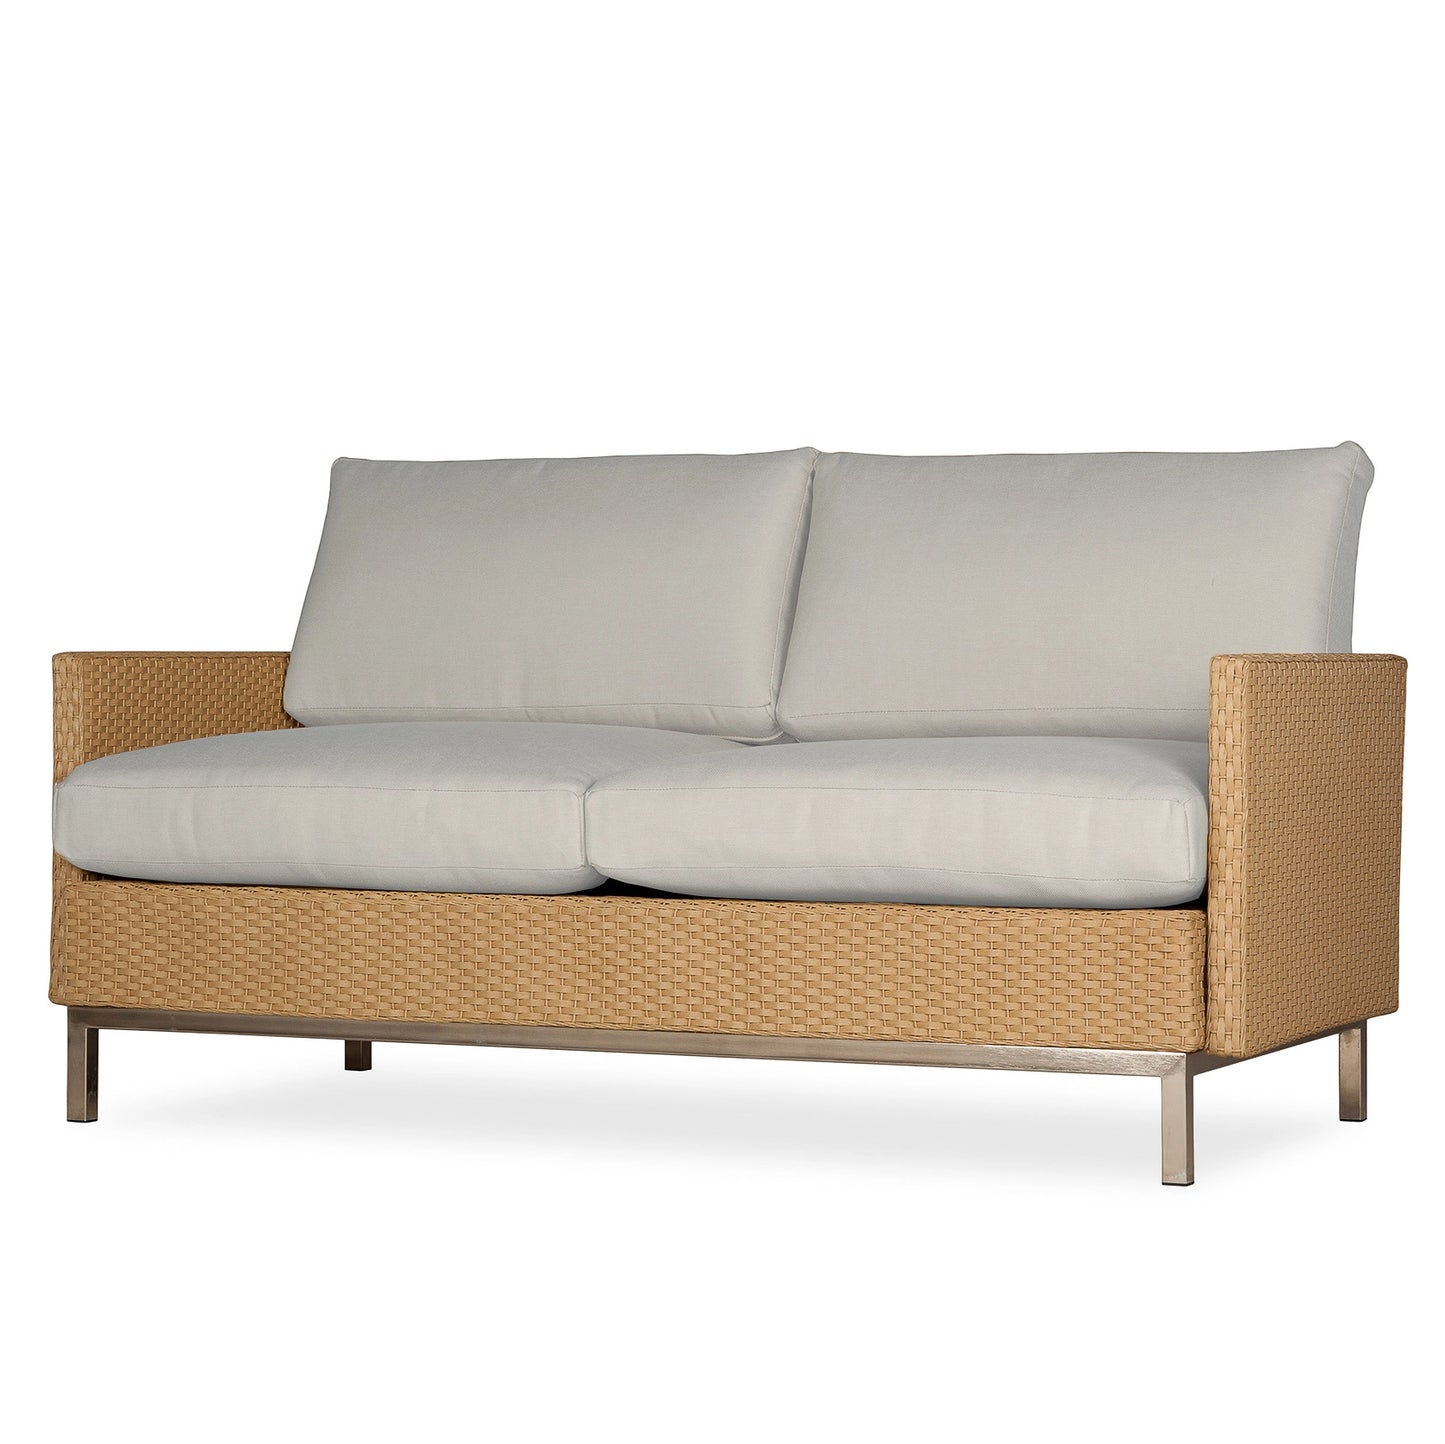 Elements Settee with Loom Arms and Back